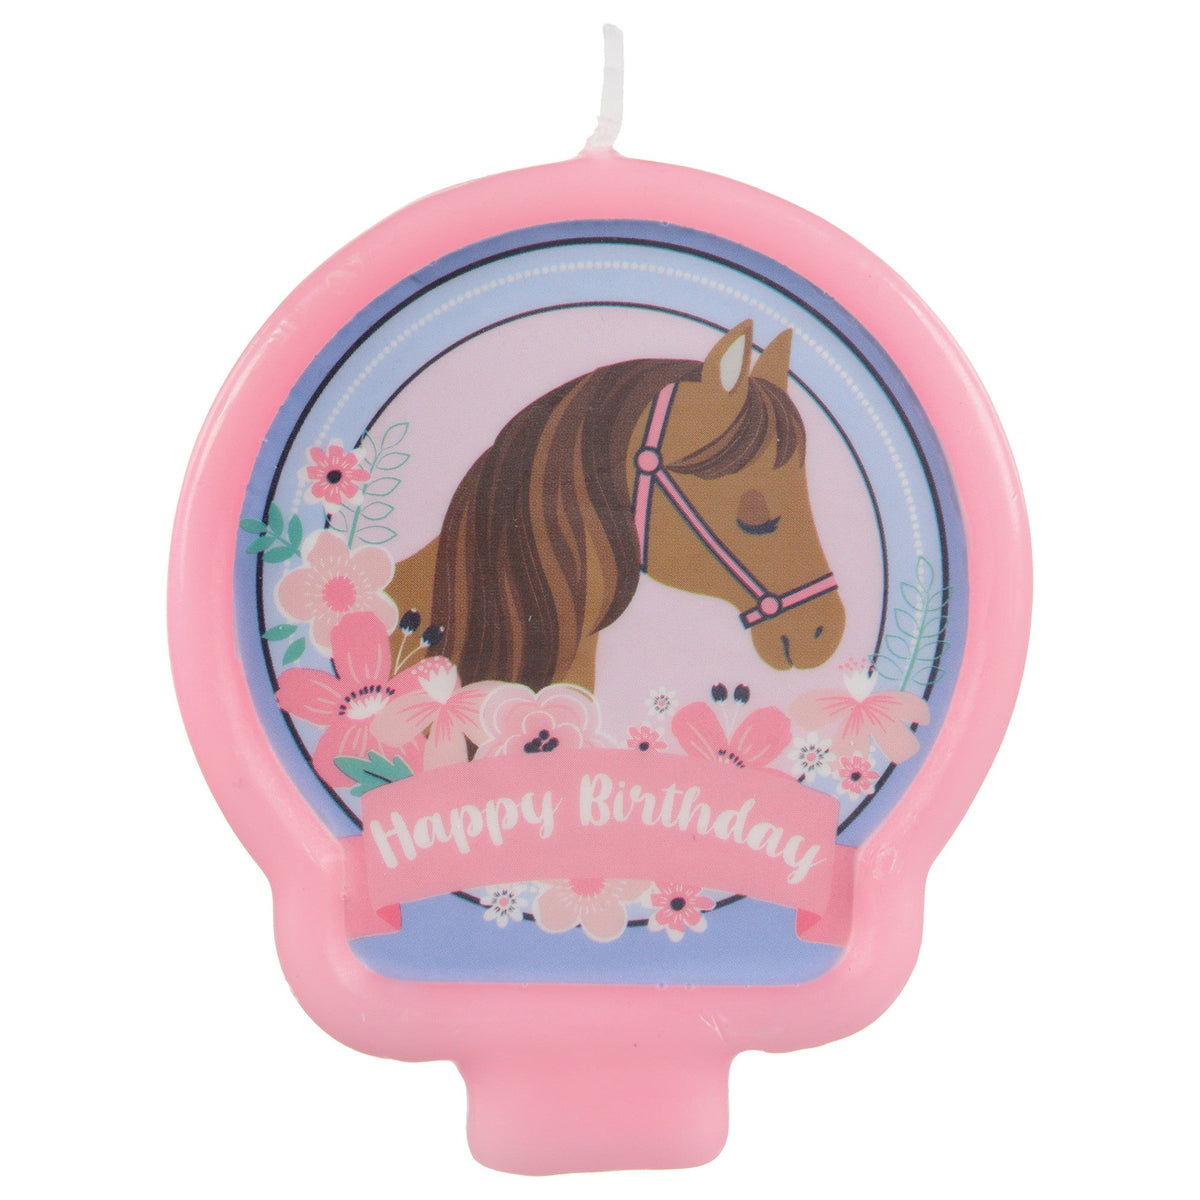 AMSCAN CA Kids Birthday Saddle Up Birthday Candle, 1 Count 192937106549